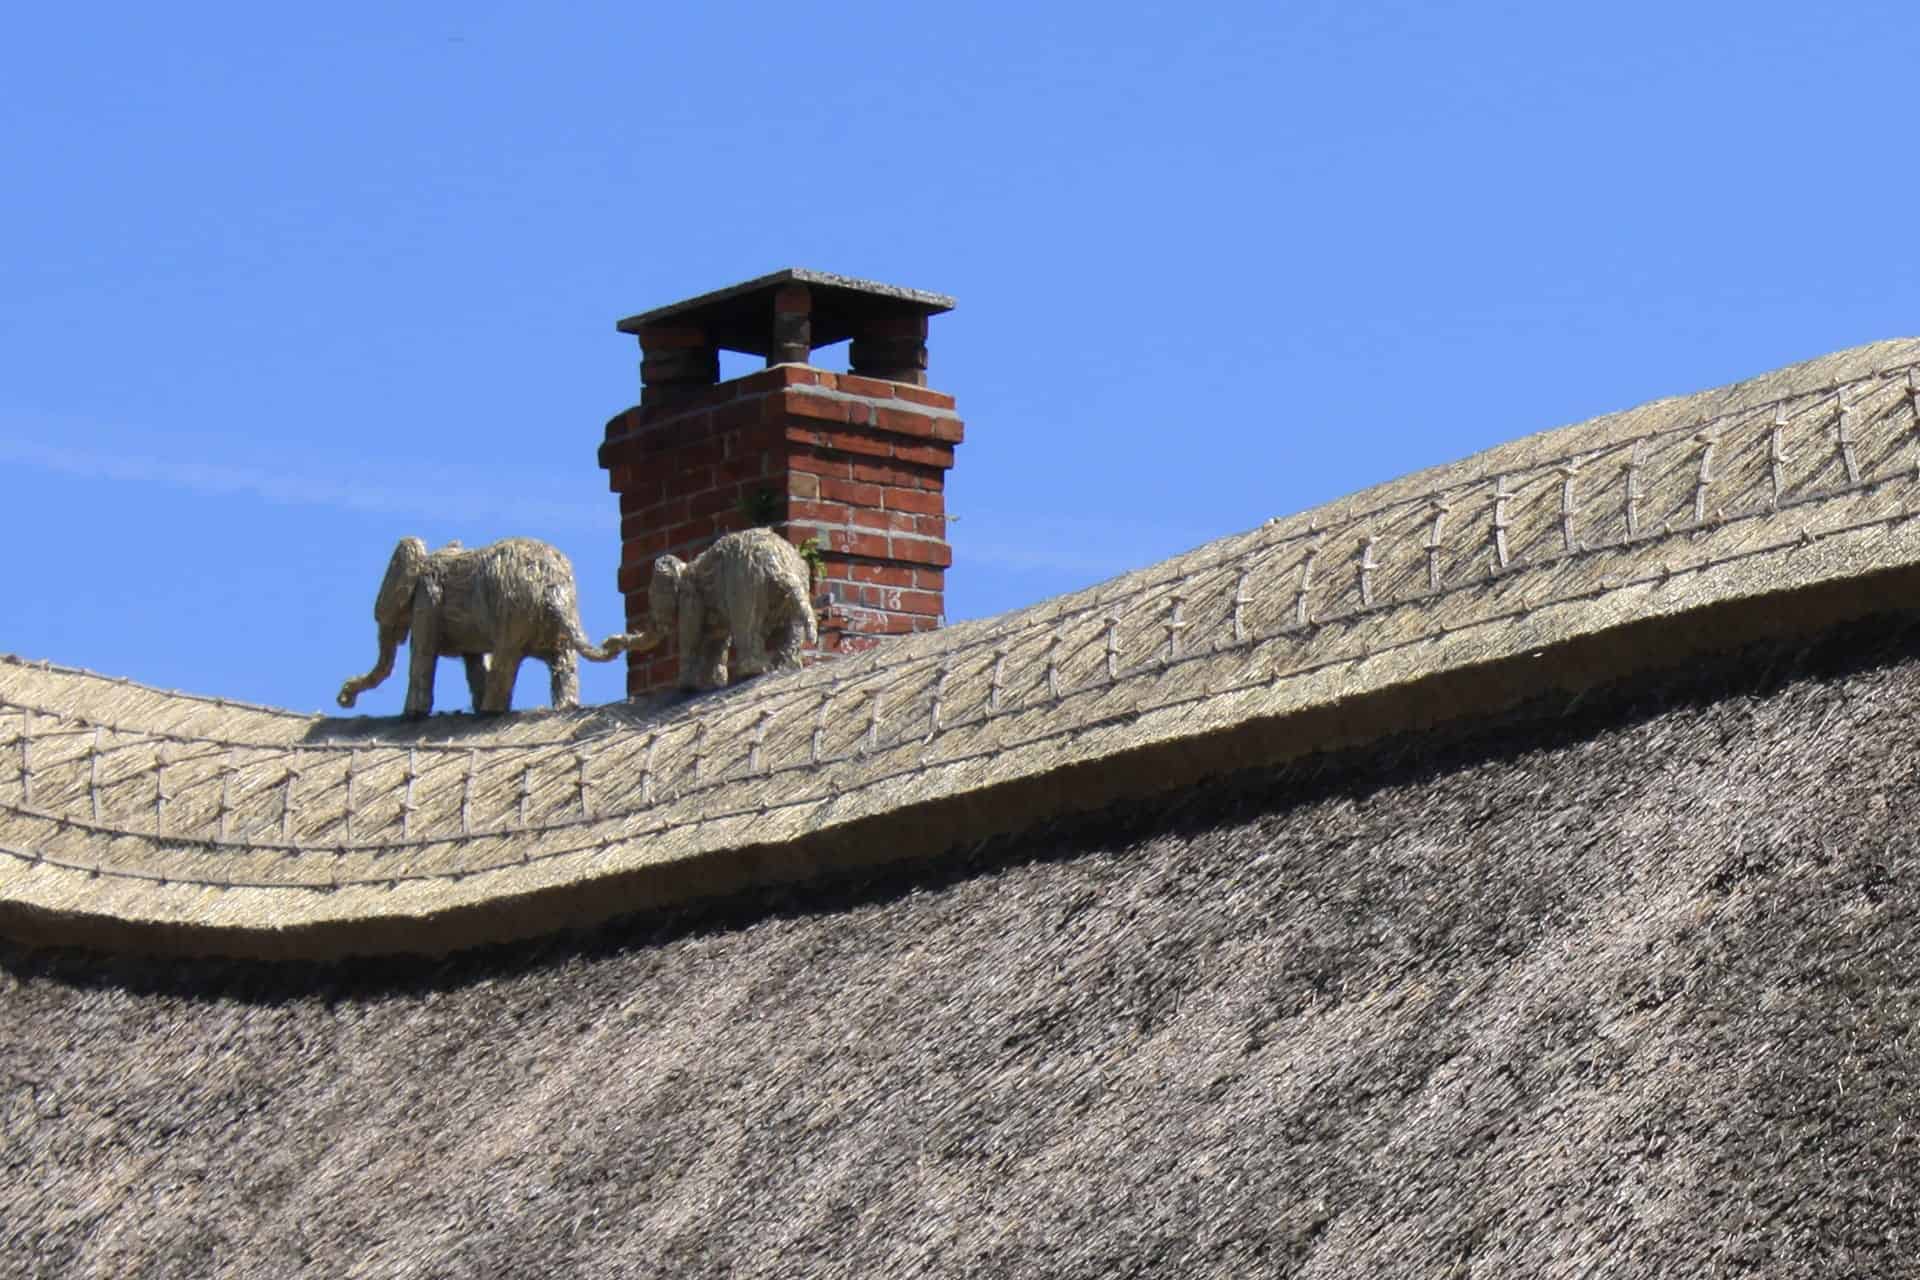 Thatched elephants walking on thatched roof top